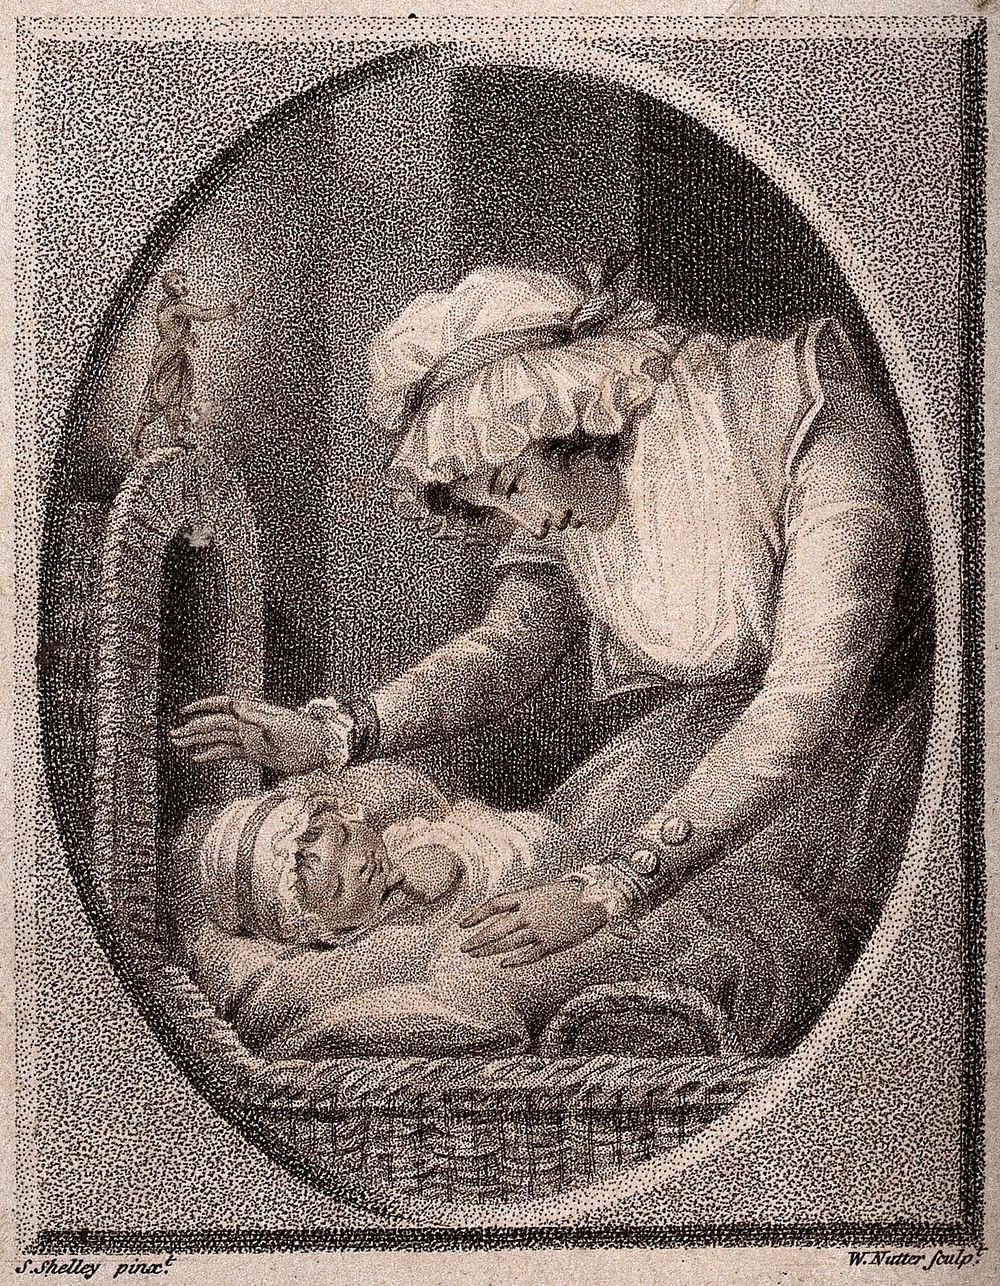 A young mother looks over her baby as it lies sleeping in its crib. Stipple engraving, 1789, by W. Nutter after S. Shelley.